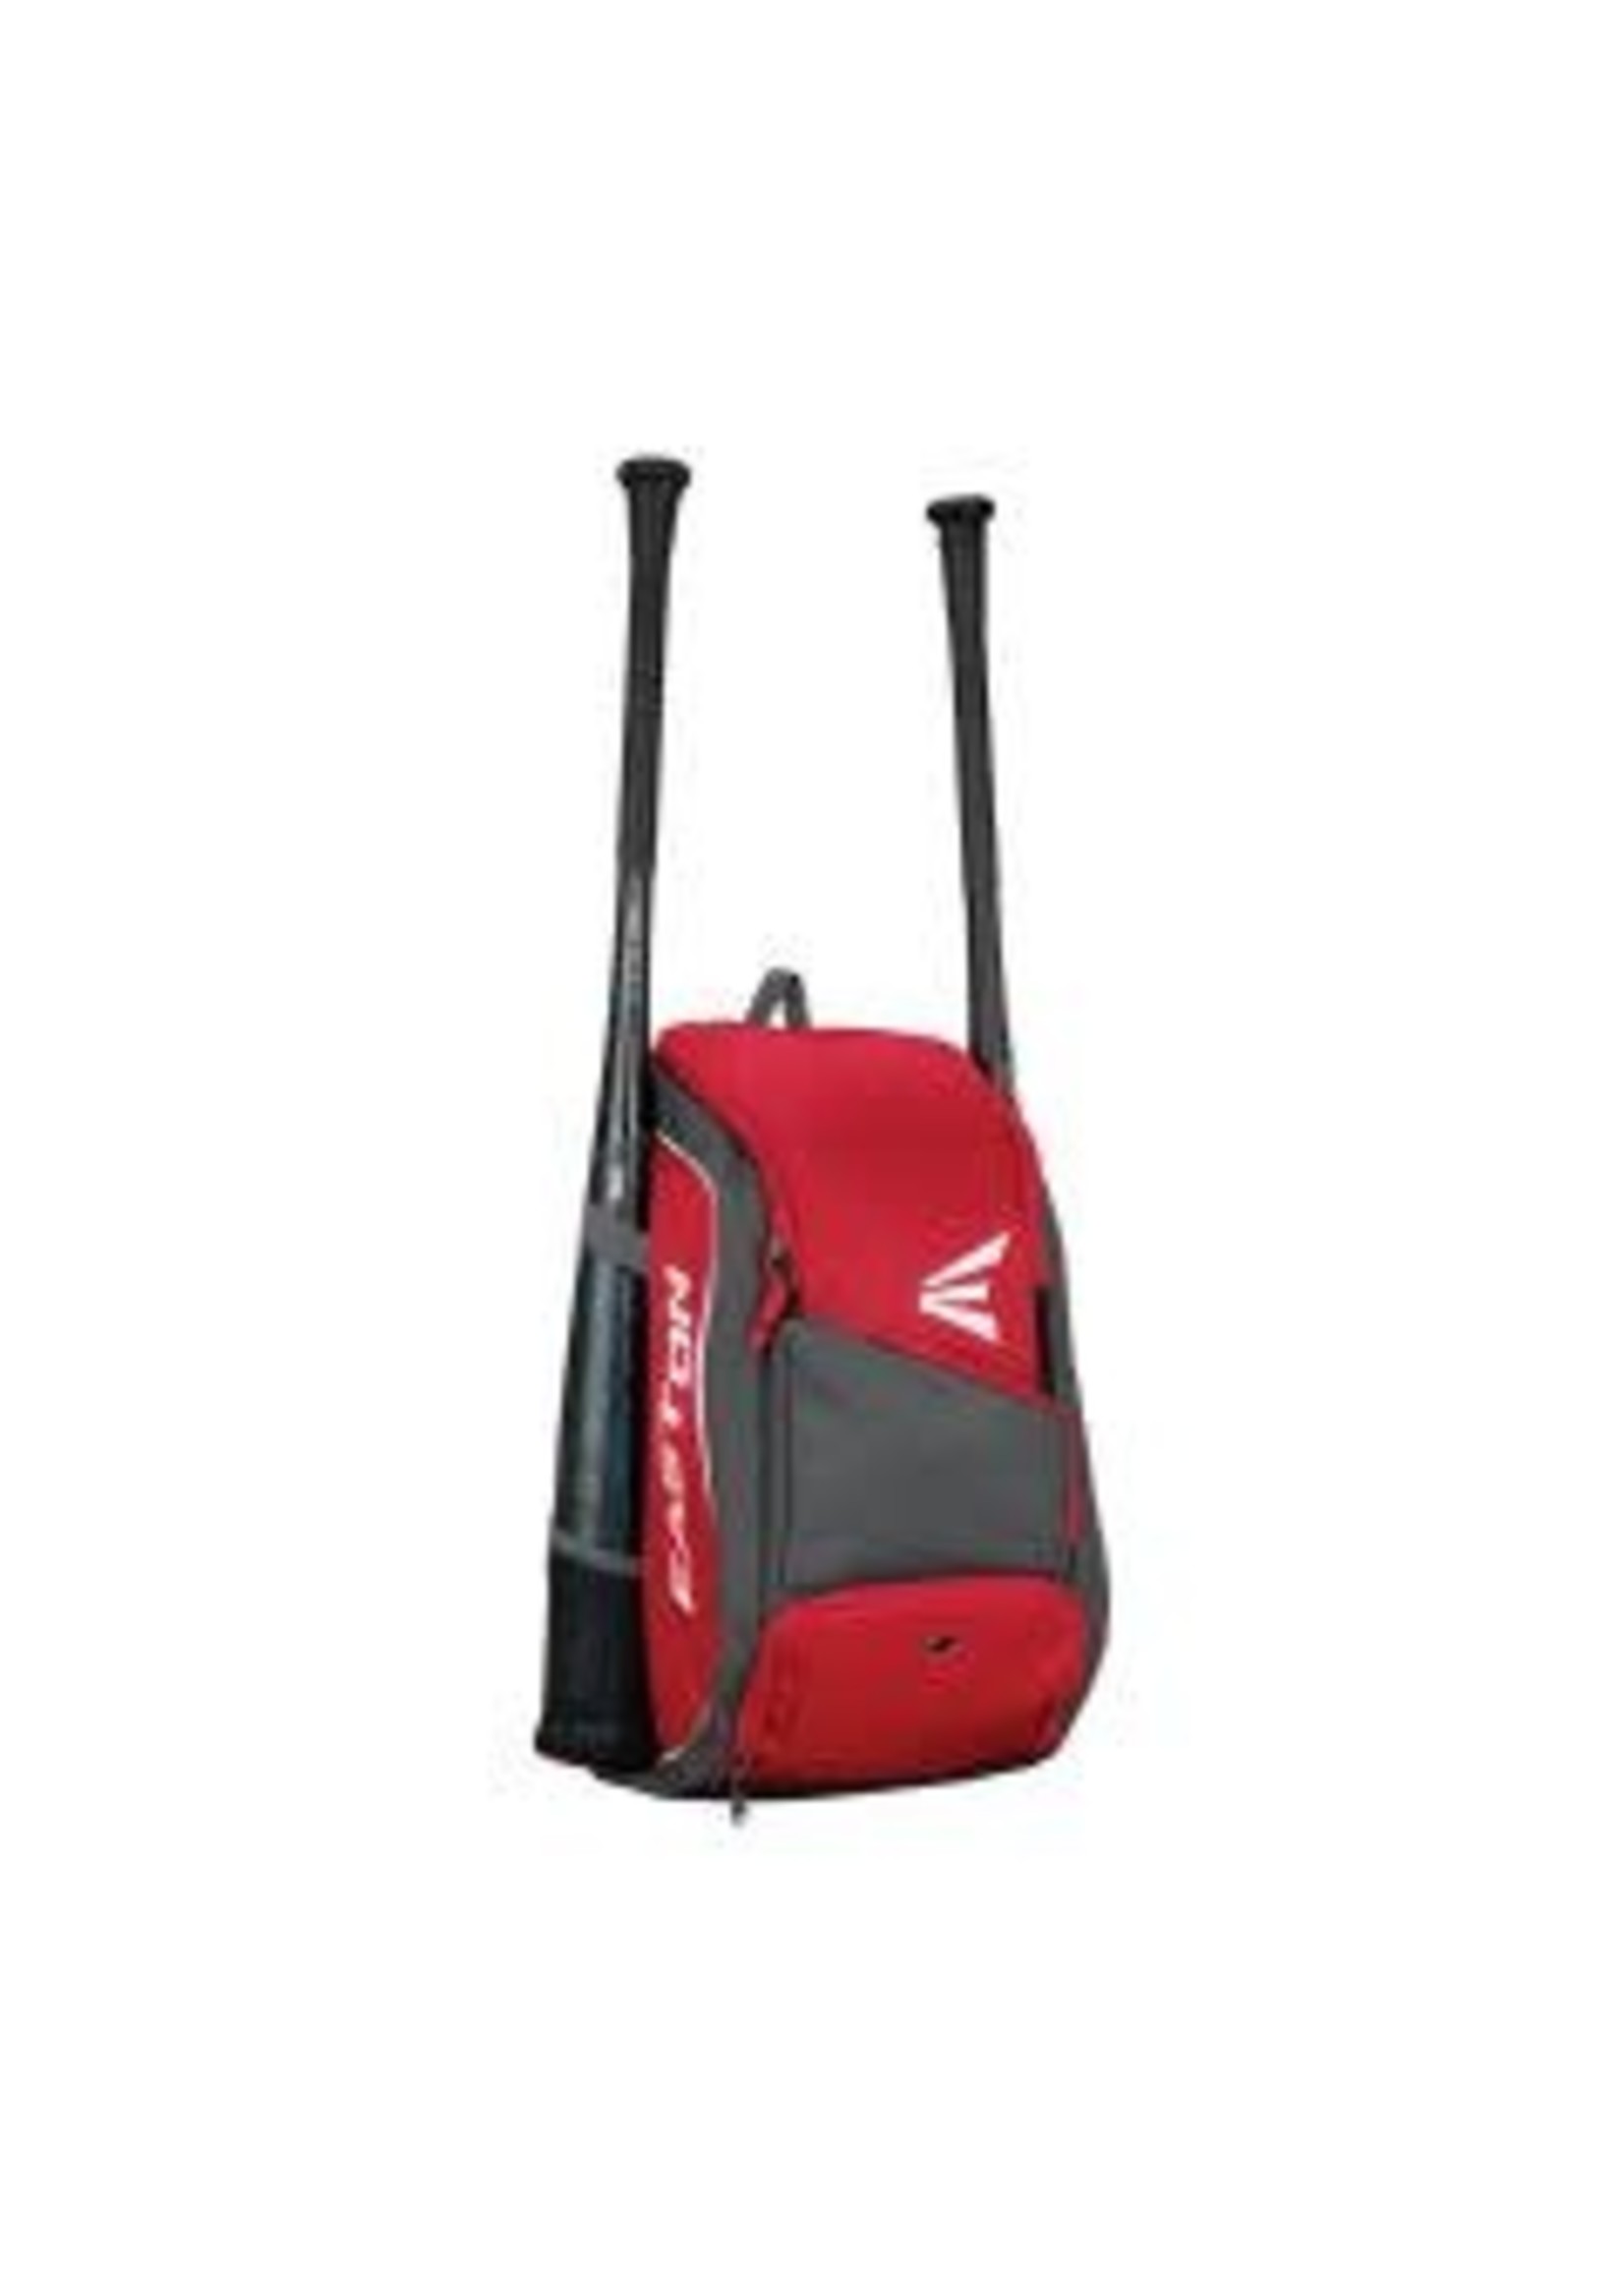 EASTON EASTON GAME READY BACKPACK 20"H x 12.5"W x 8.5D